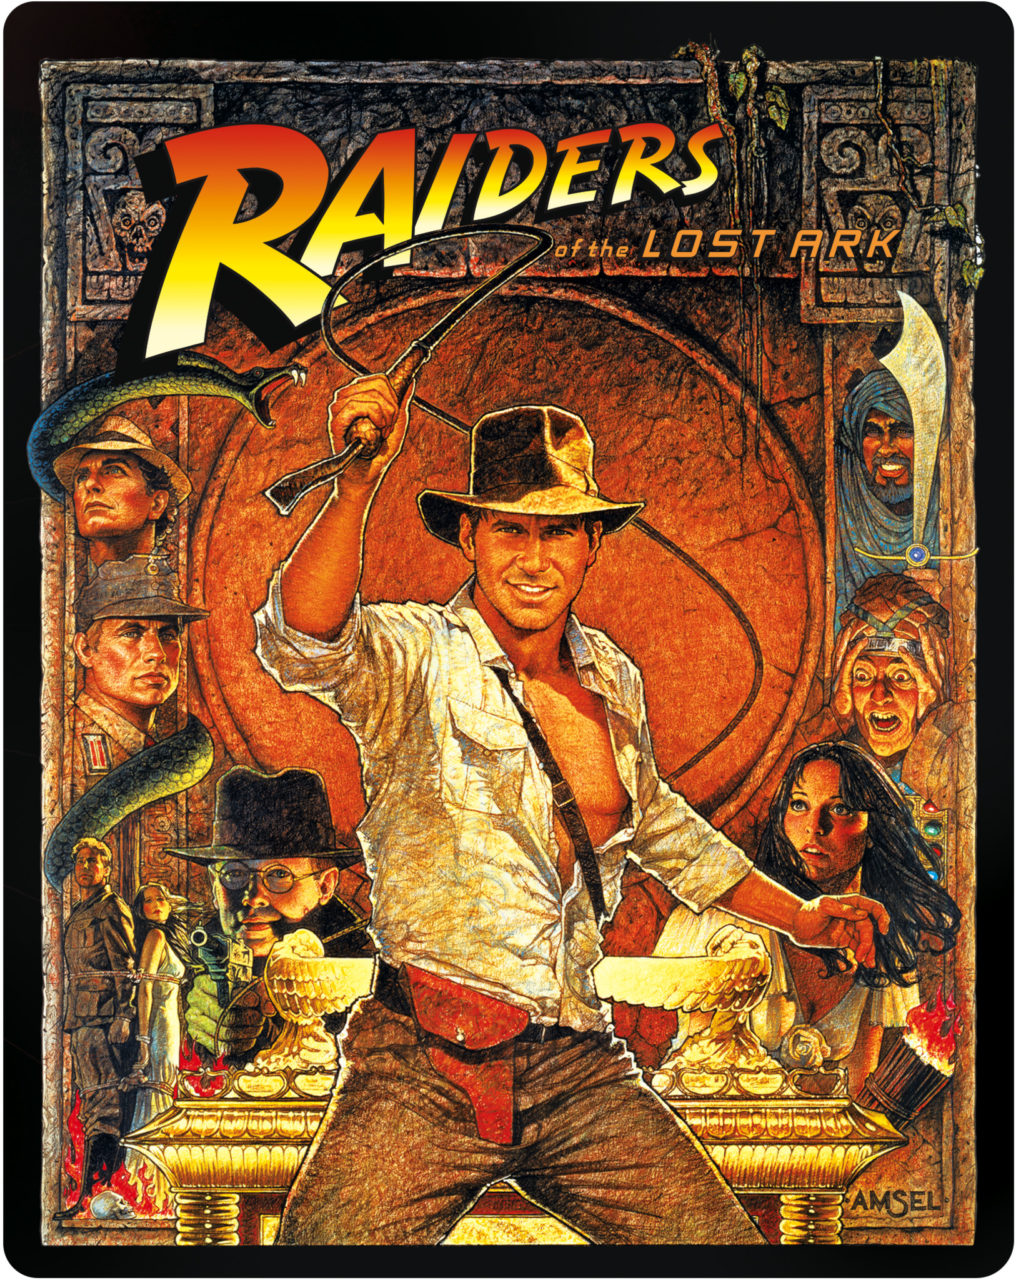 Indiana Jones: Raiders Of The Lost Ark 4K Ultra HD Steelbook Combo Pack cover (Paramount Pictures)